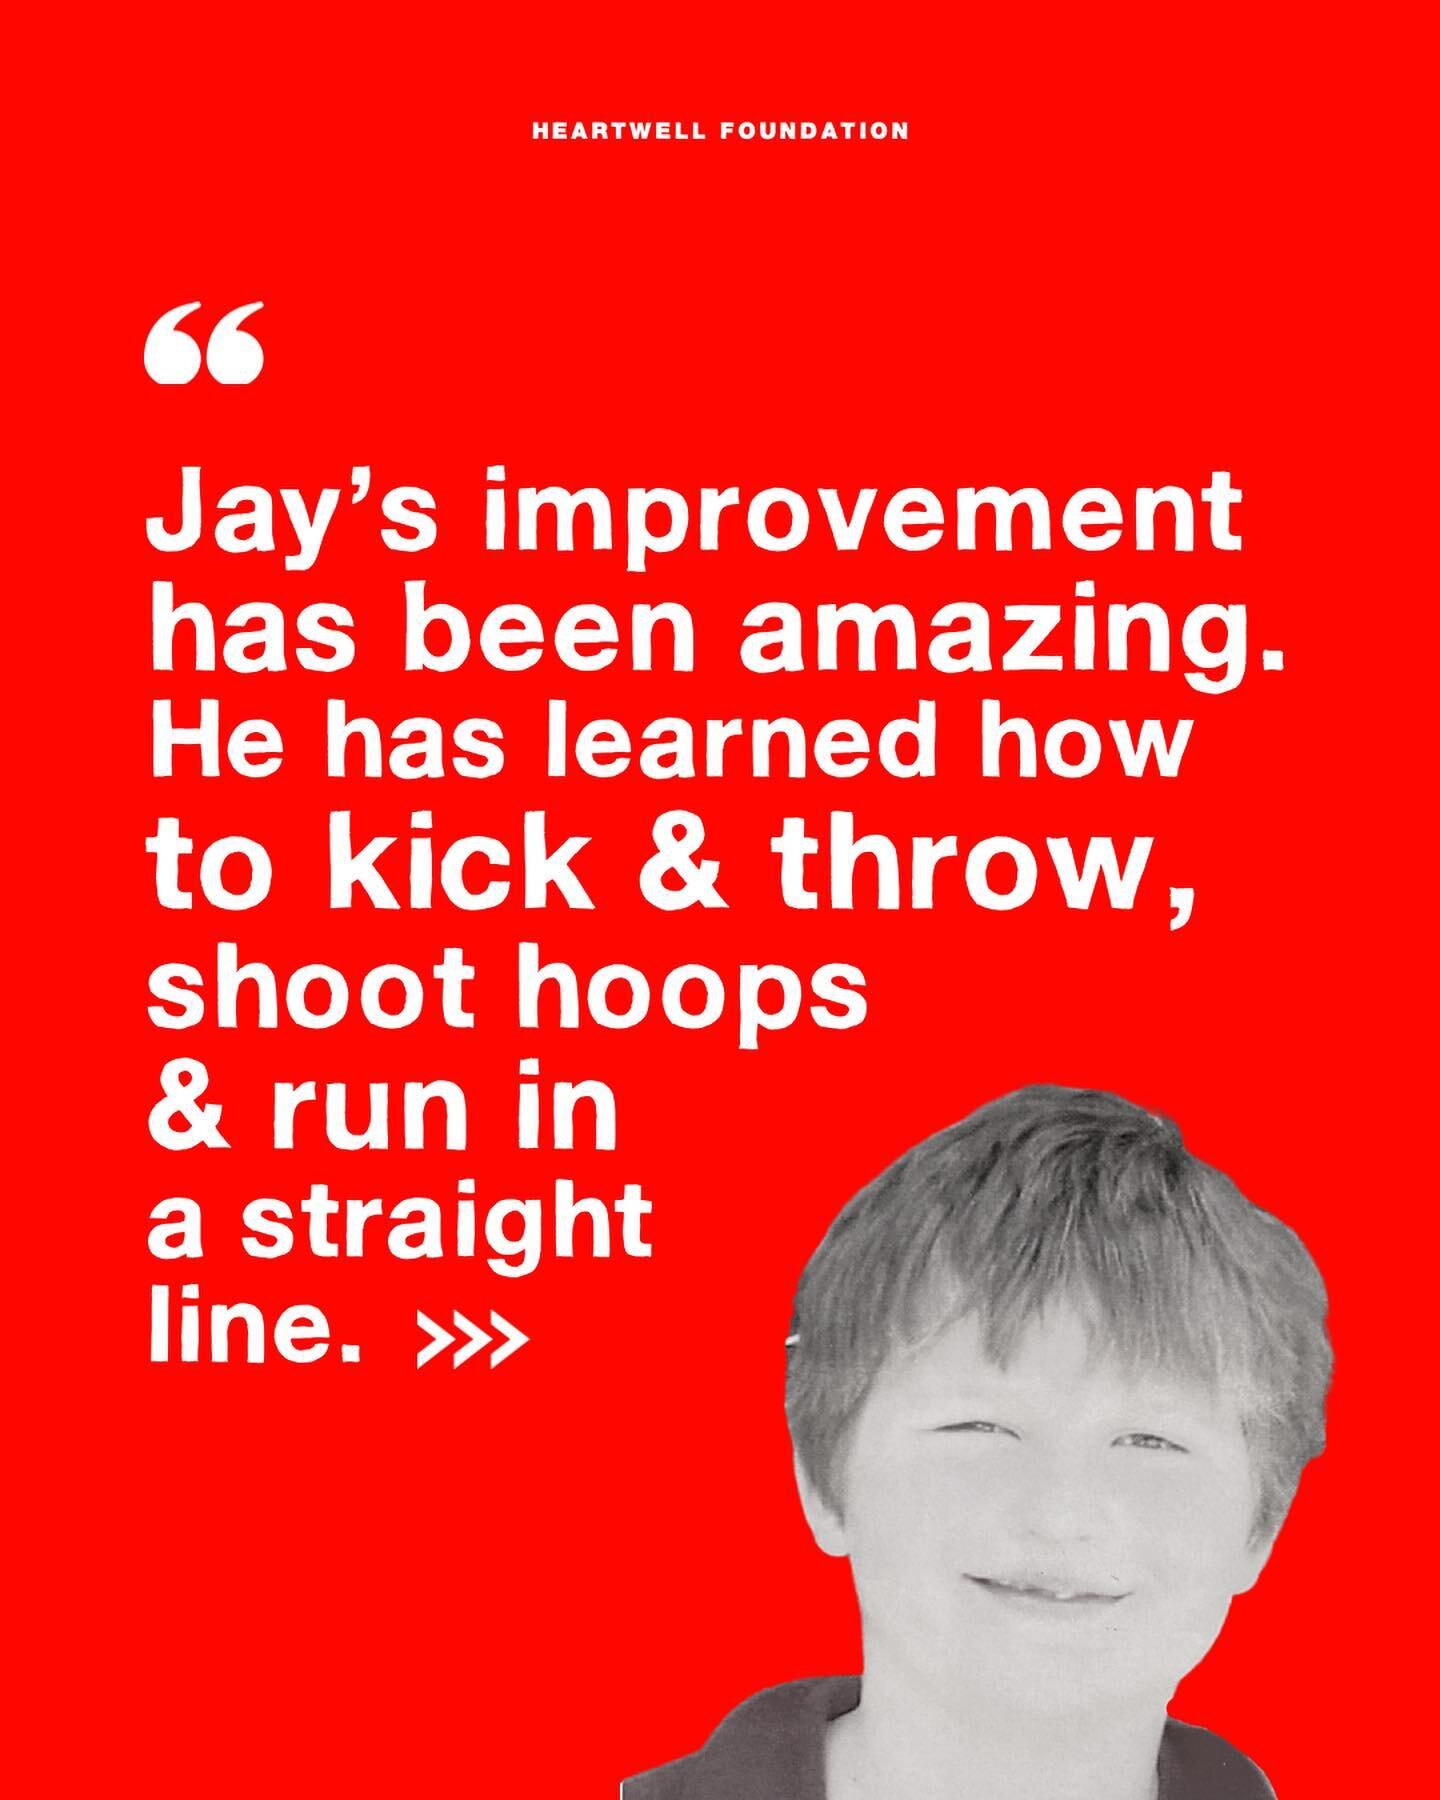 April&rsquo;s words on her son, Jay, and his time at Heartwell. 

#CreatingALevelPlayingField 

Slide one
In white text over red background:
&ldquo;Jay&rsquo;s improvement has been amazing. He has learned how to kick and throw, shoot hoops and run in